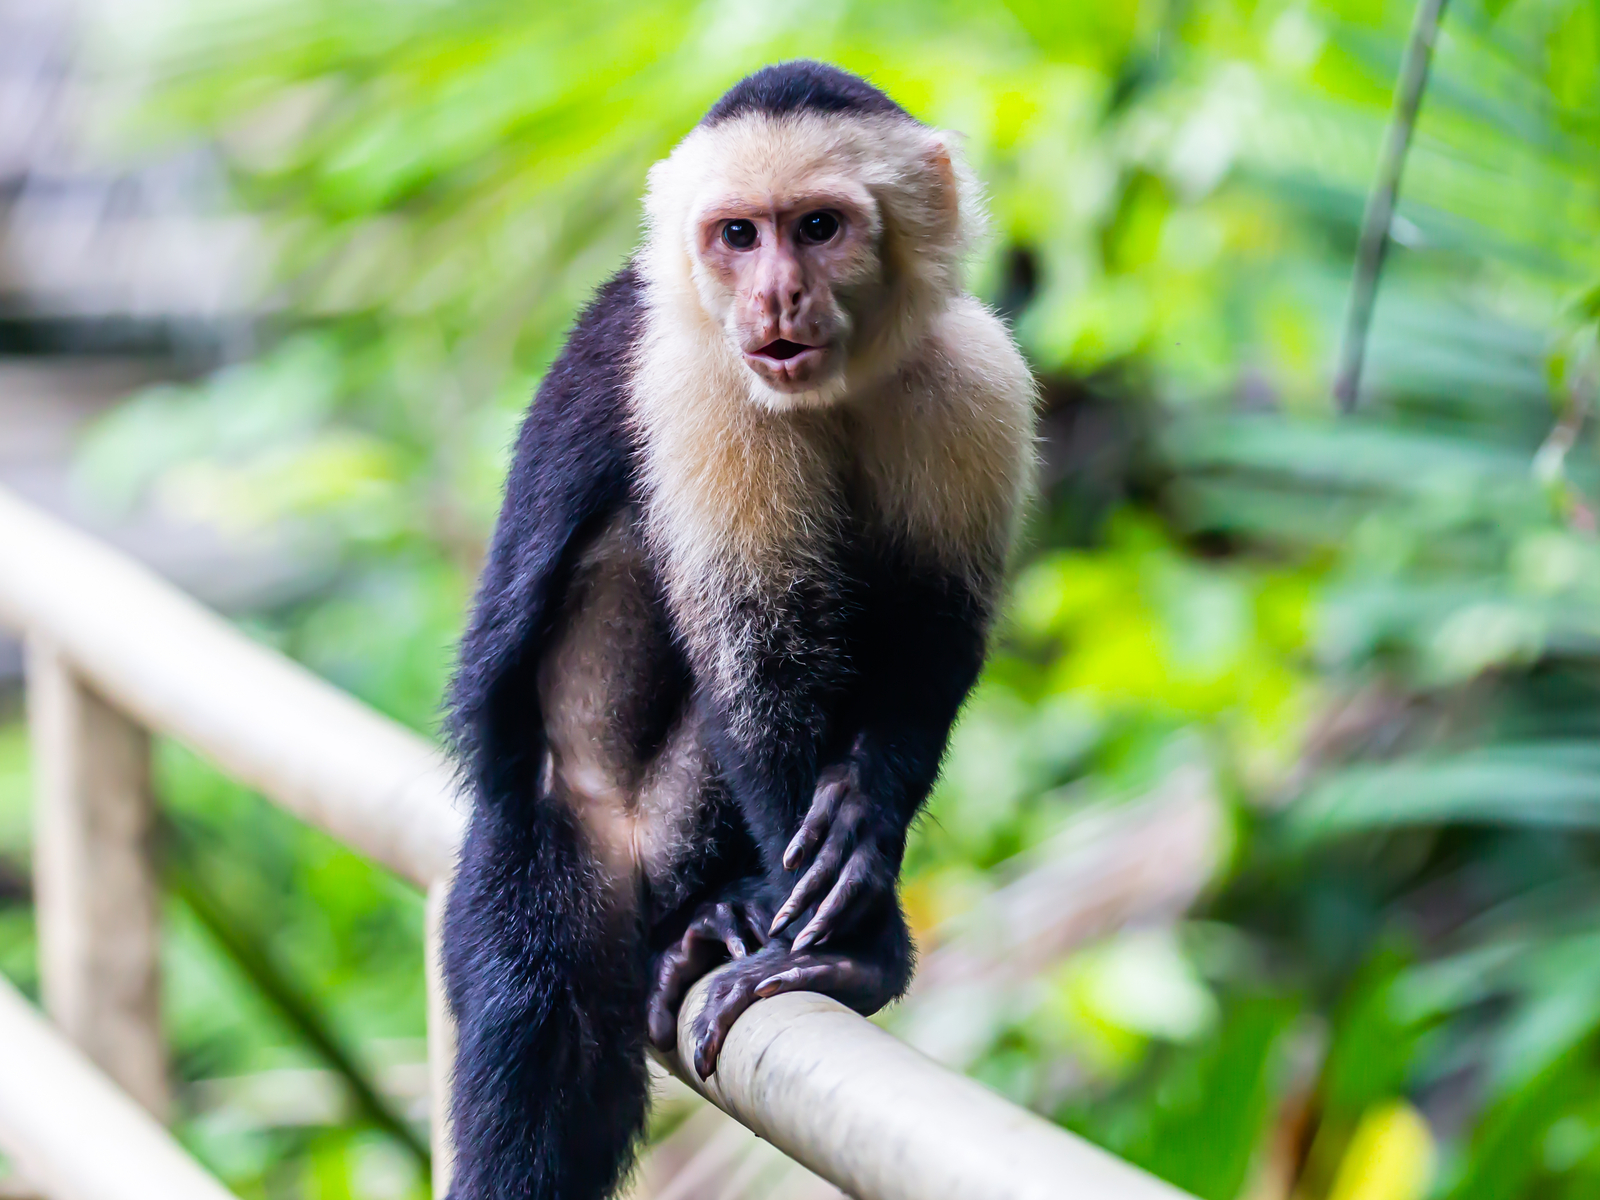 Capuchin monkey at the San Antonio Zoo, one of the best things to do in the city